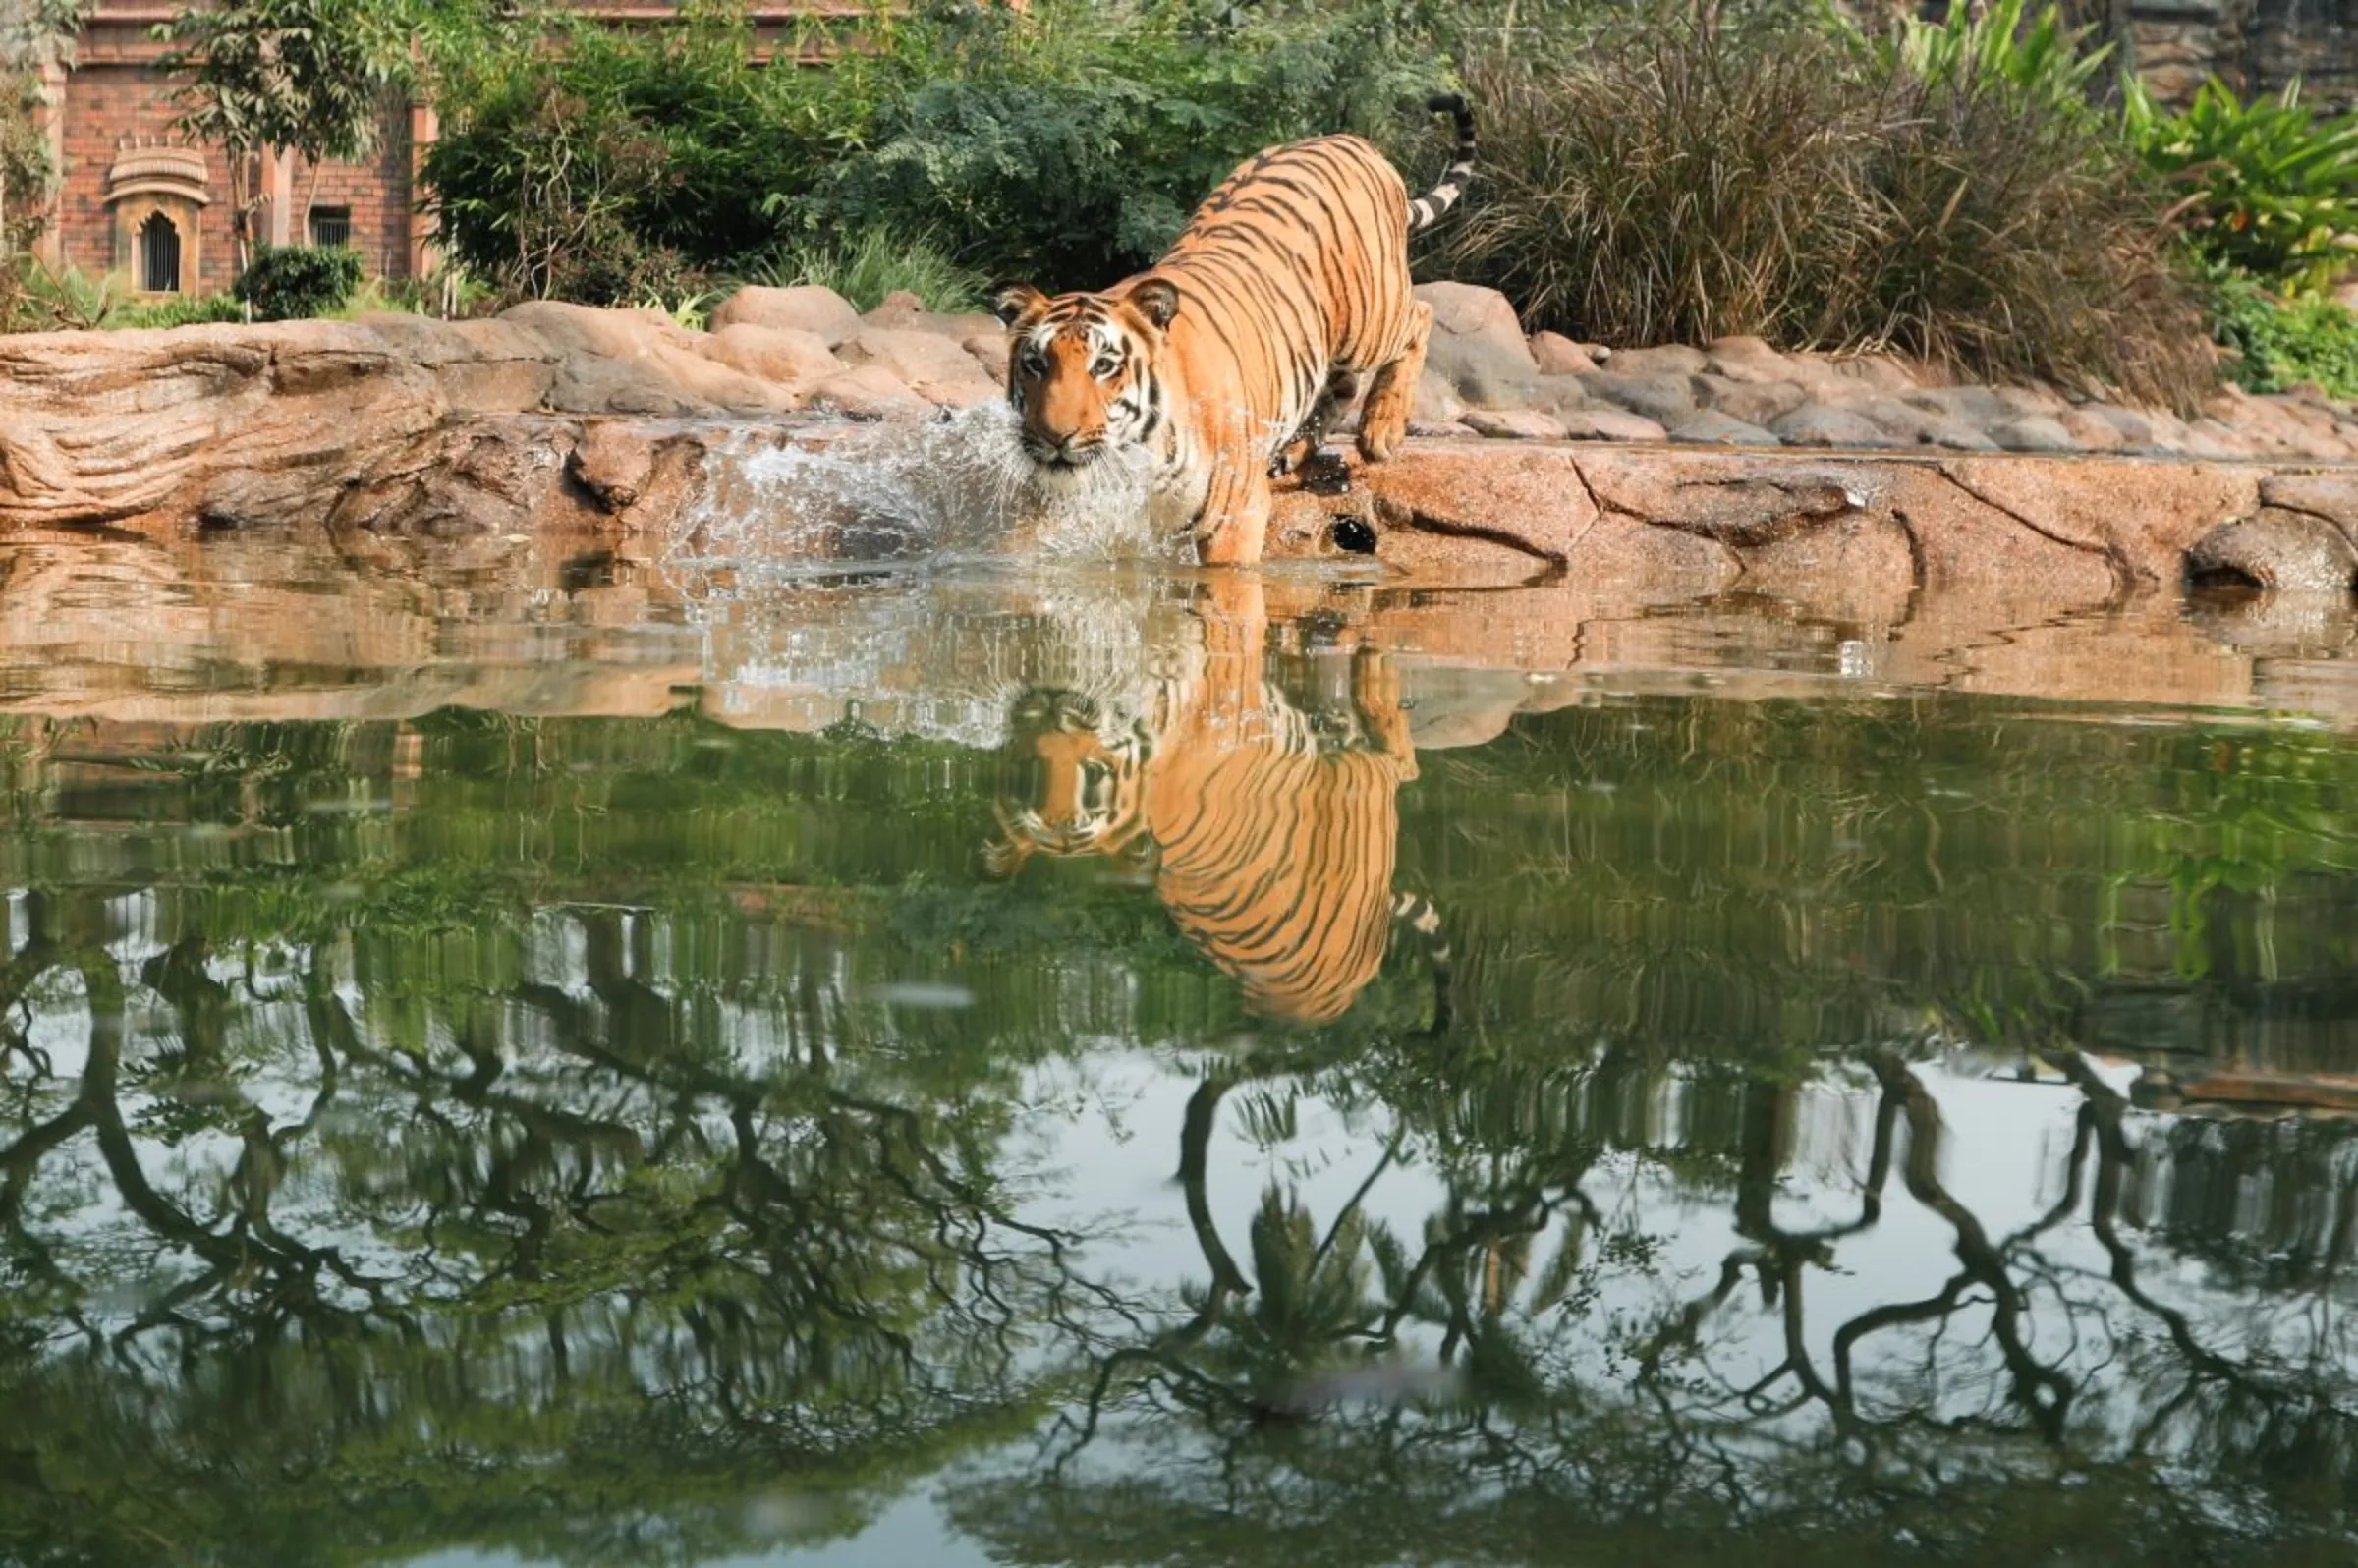 A tiger gets into water inside an enclosure at a zoo, in Mumbai, India, February, 15, 2021